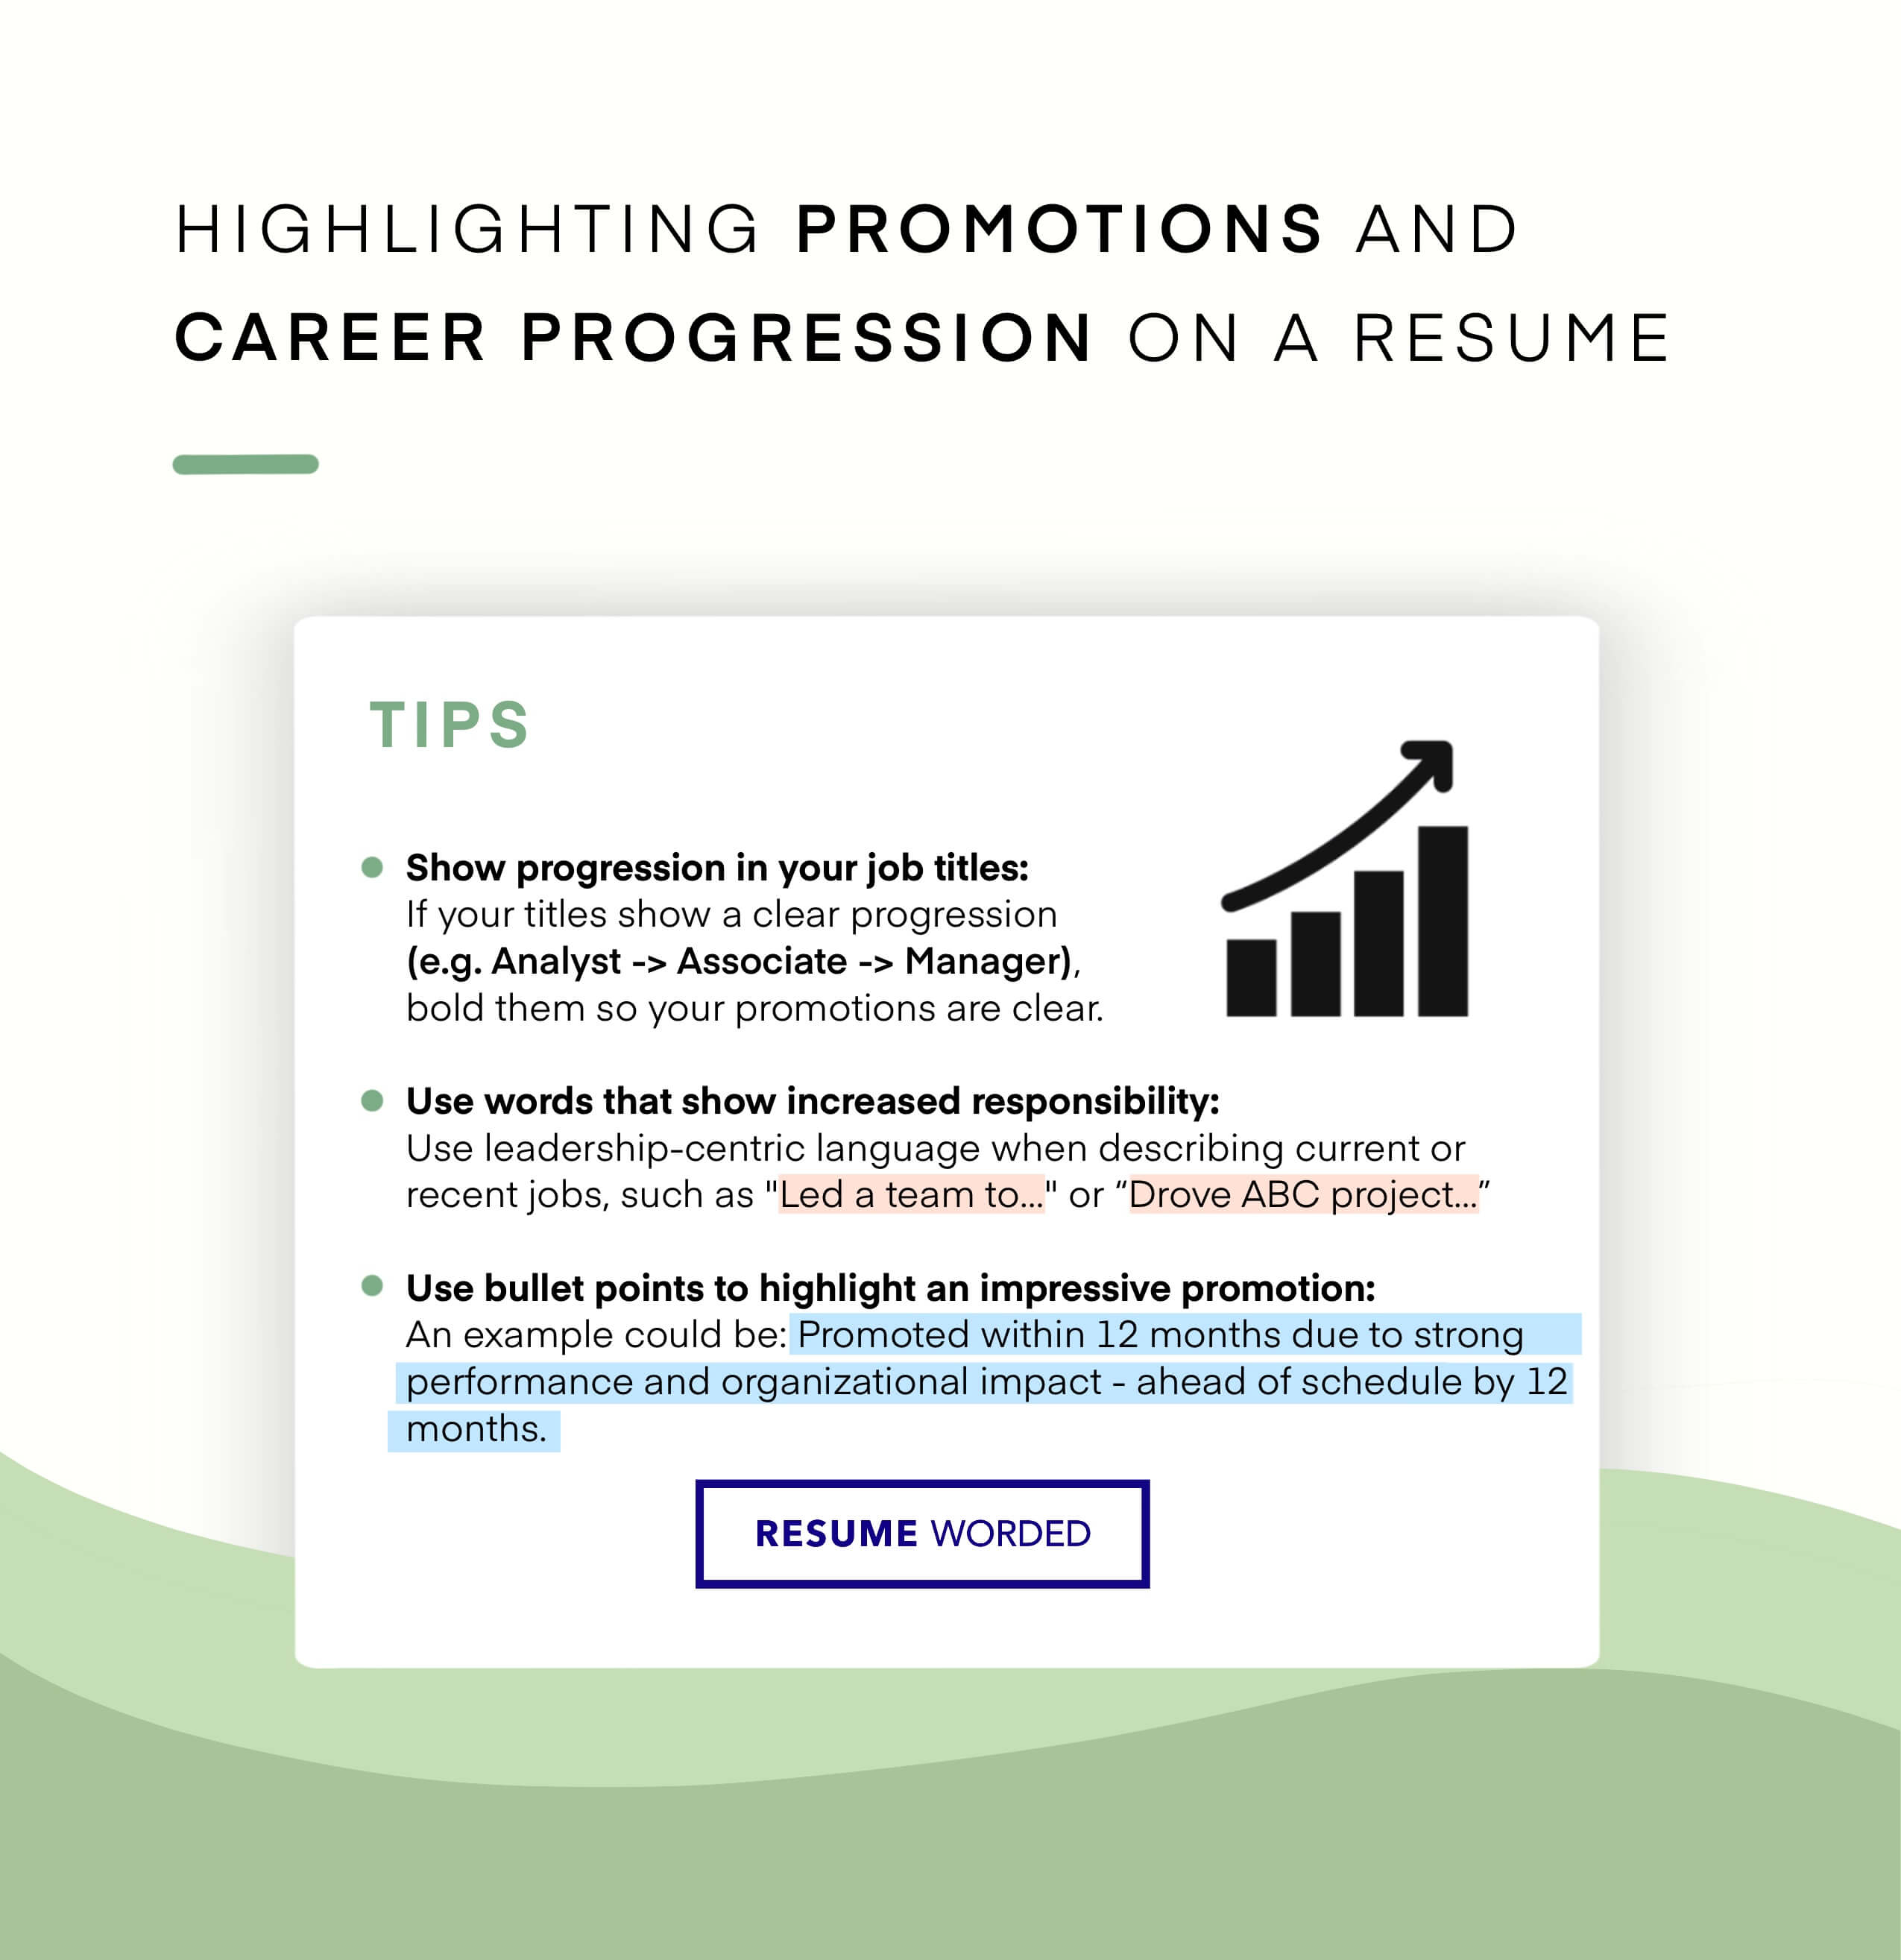 Promotions on a resume